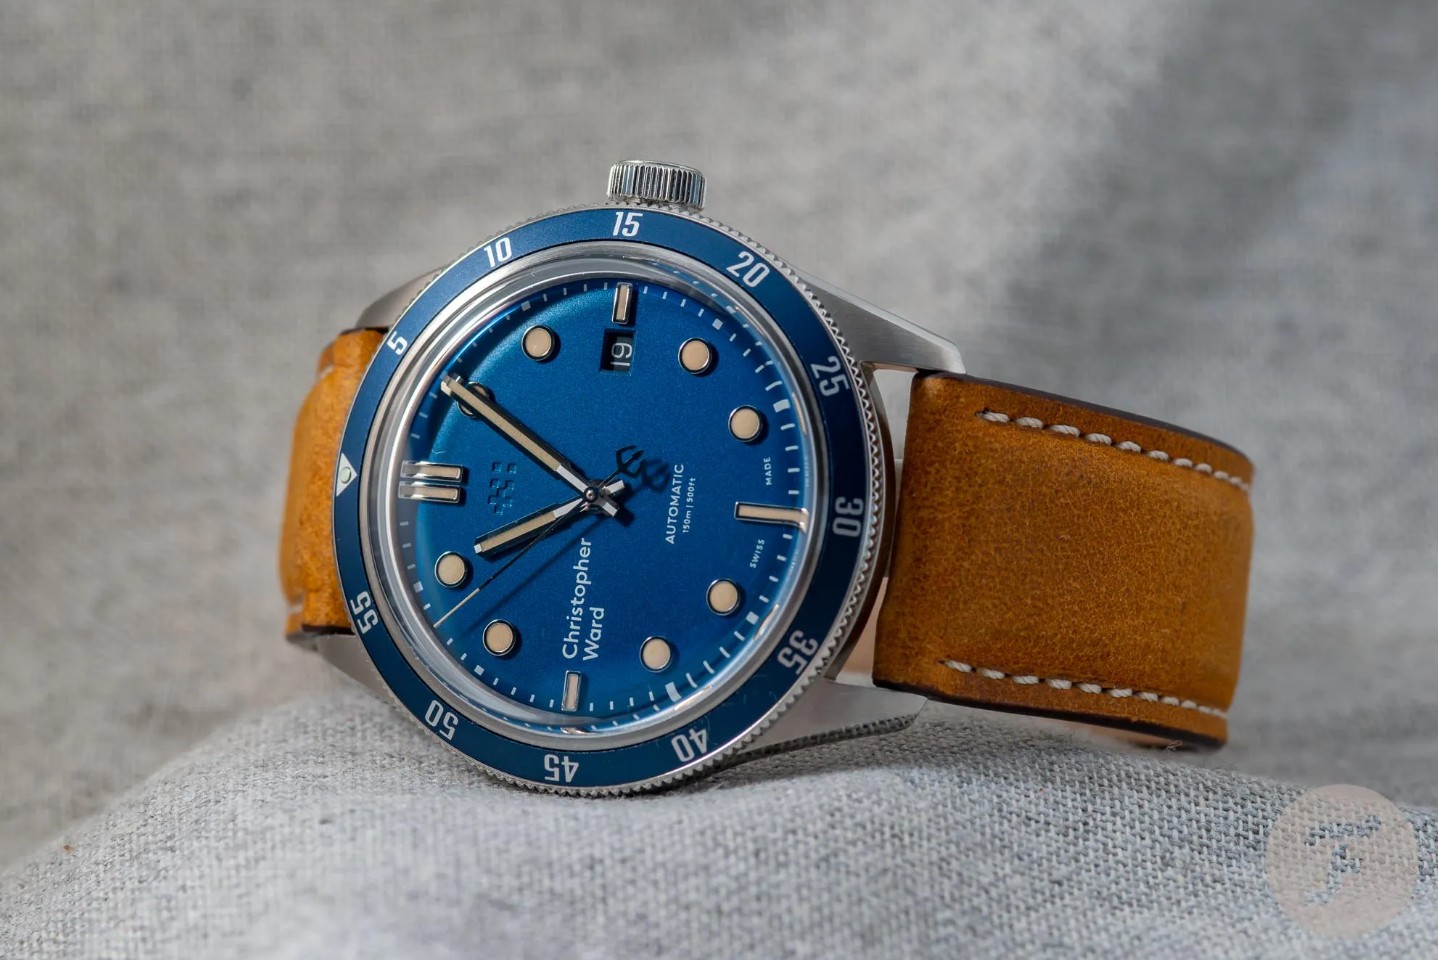 Christopher Ward C65 Trident in-Depth Review